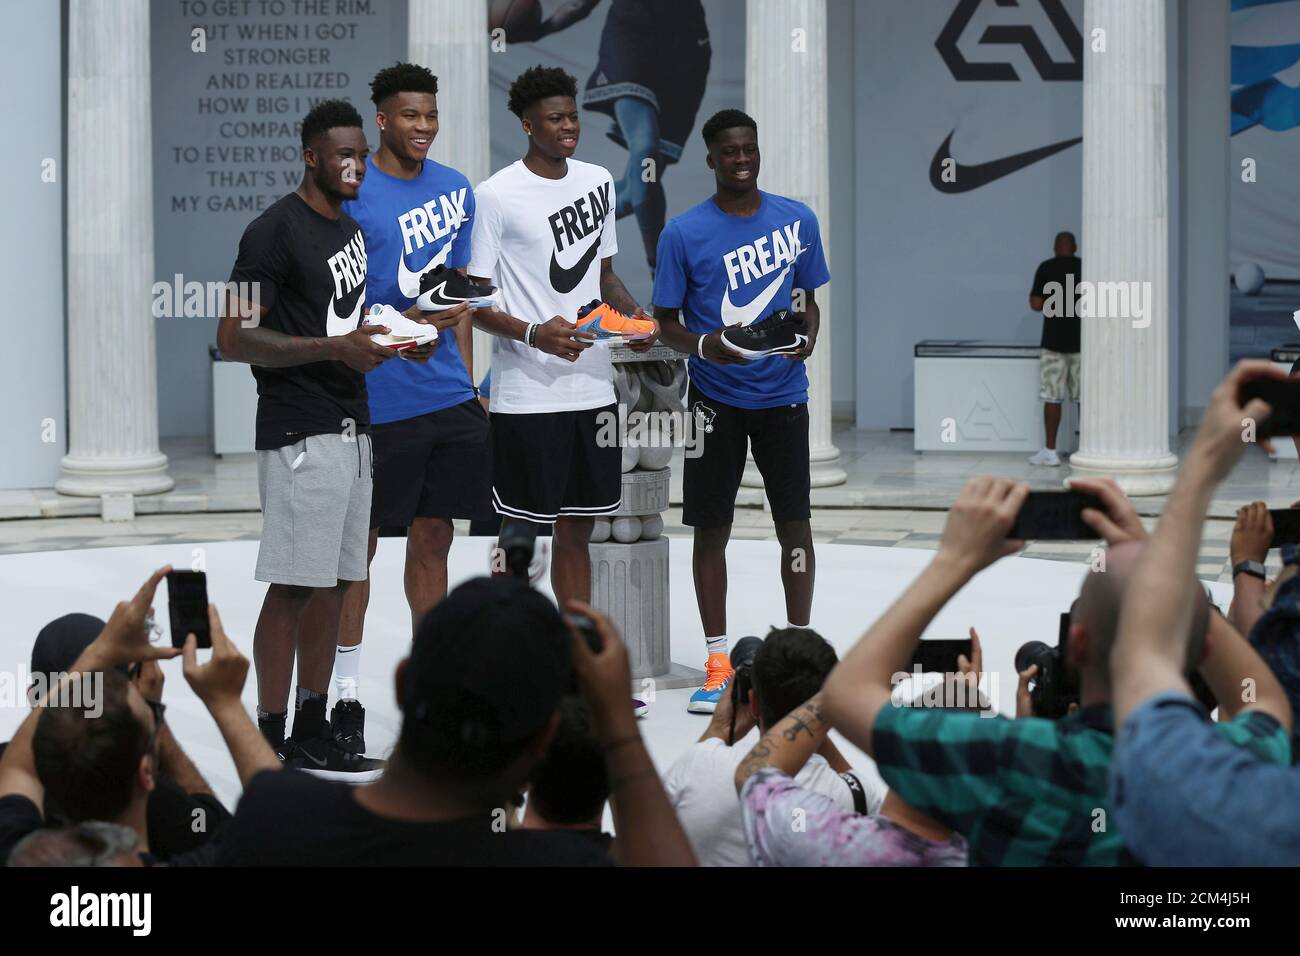 Milwaukee Bucks forward and NBA's MVP Giannis Antetokounmpo poses with his  brothers Thanasis, Kostas, Alex, during an official presentation event of a  Nike Shoe, in Athens, Greece June 28, 2019. REUTERS/Costas Baltas